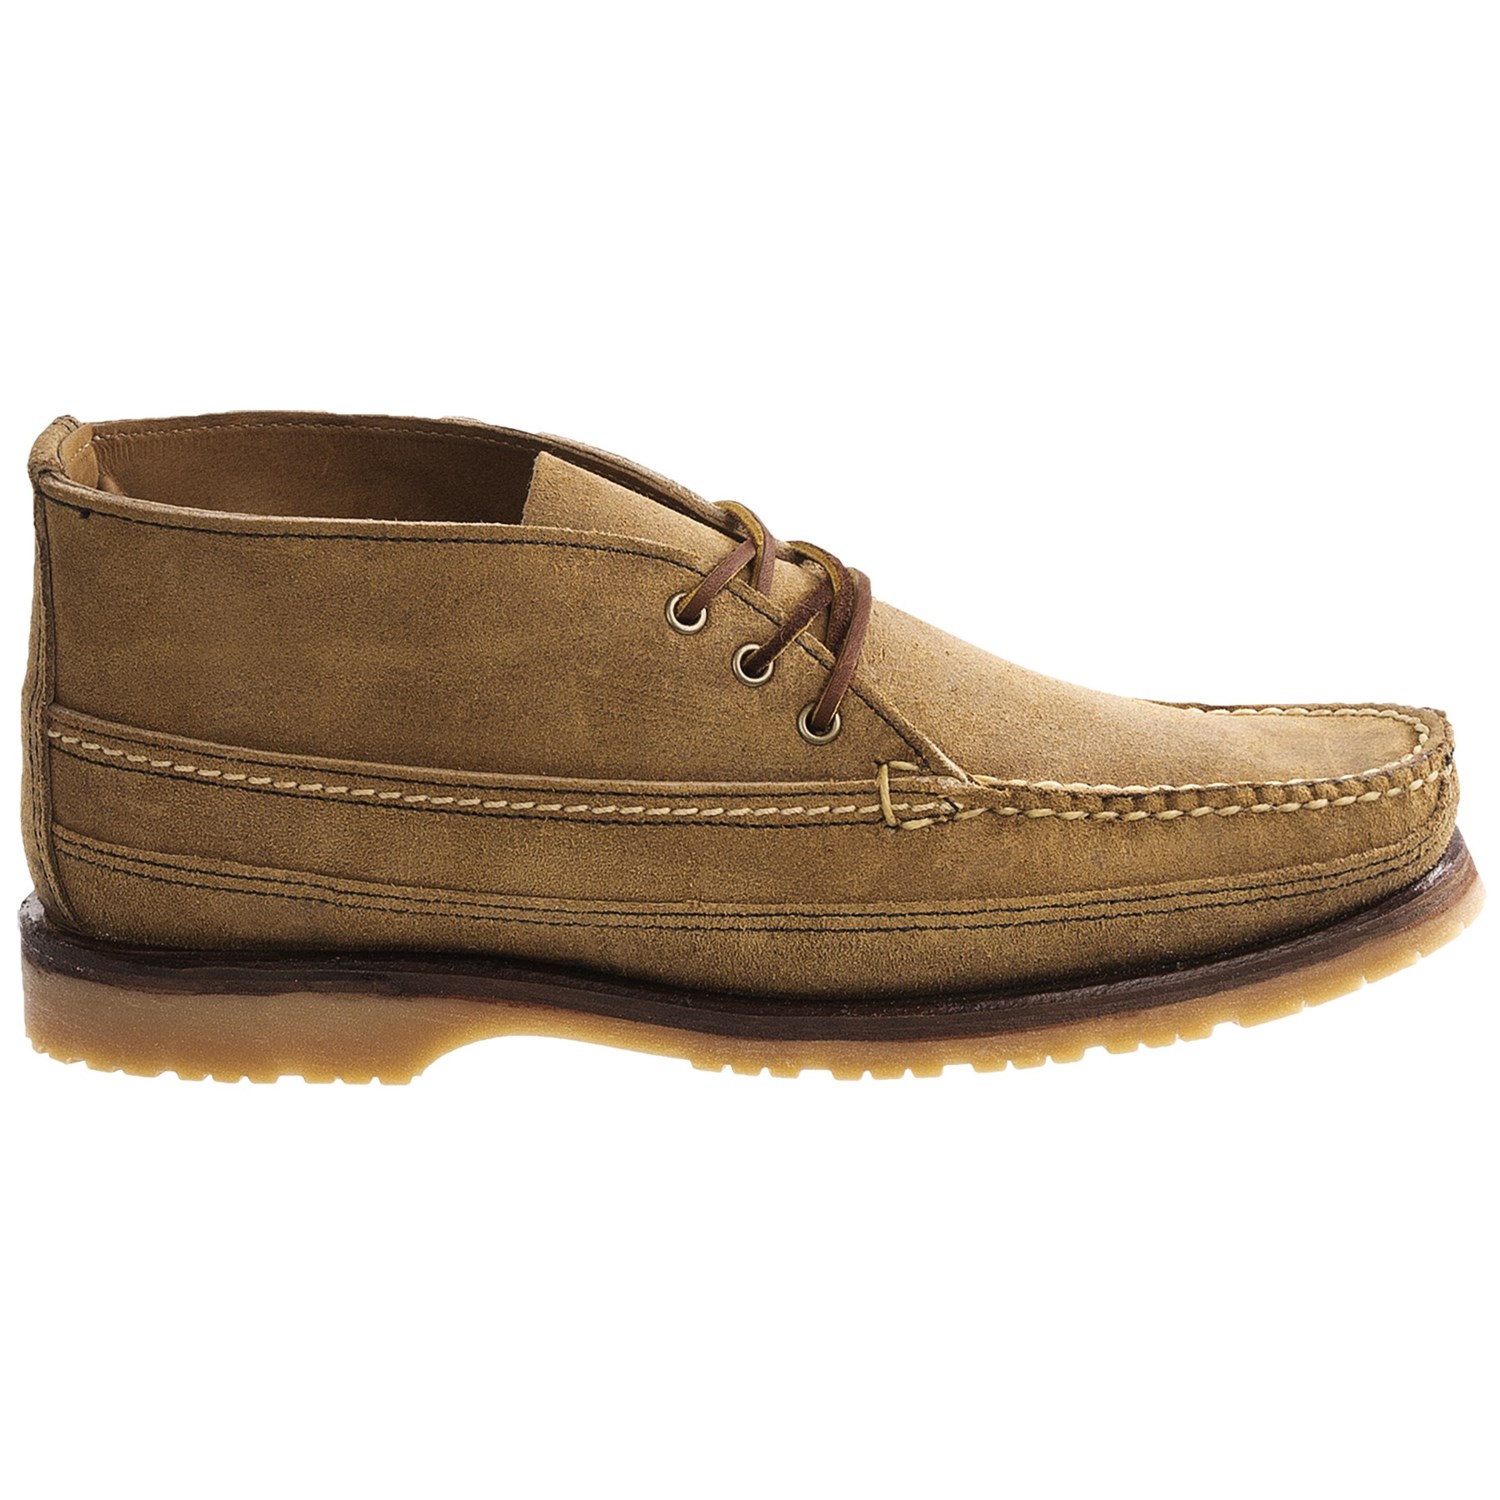 Red Wing Heritage 9179 Wabasha Chukka Boots (For Men) - Save 72%